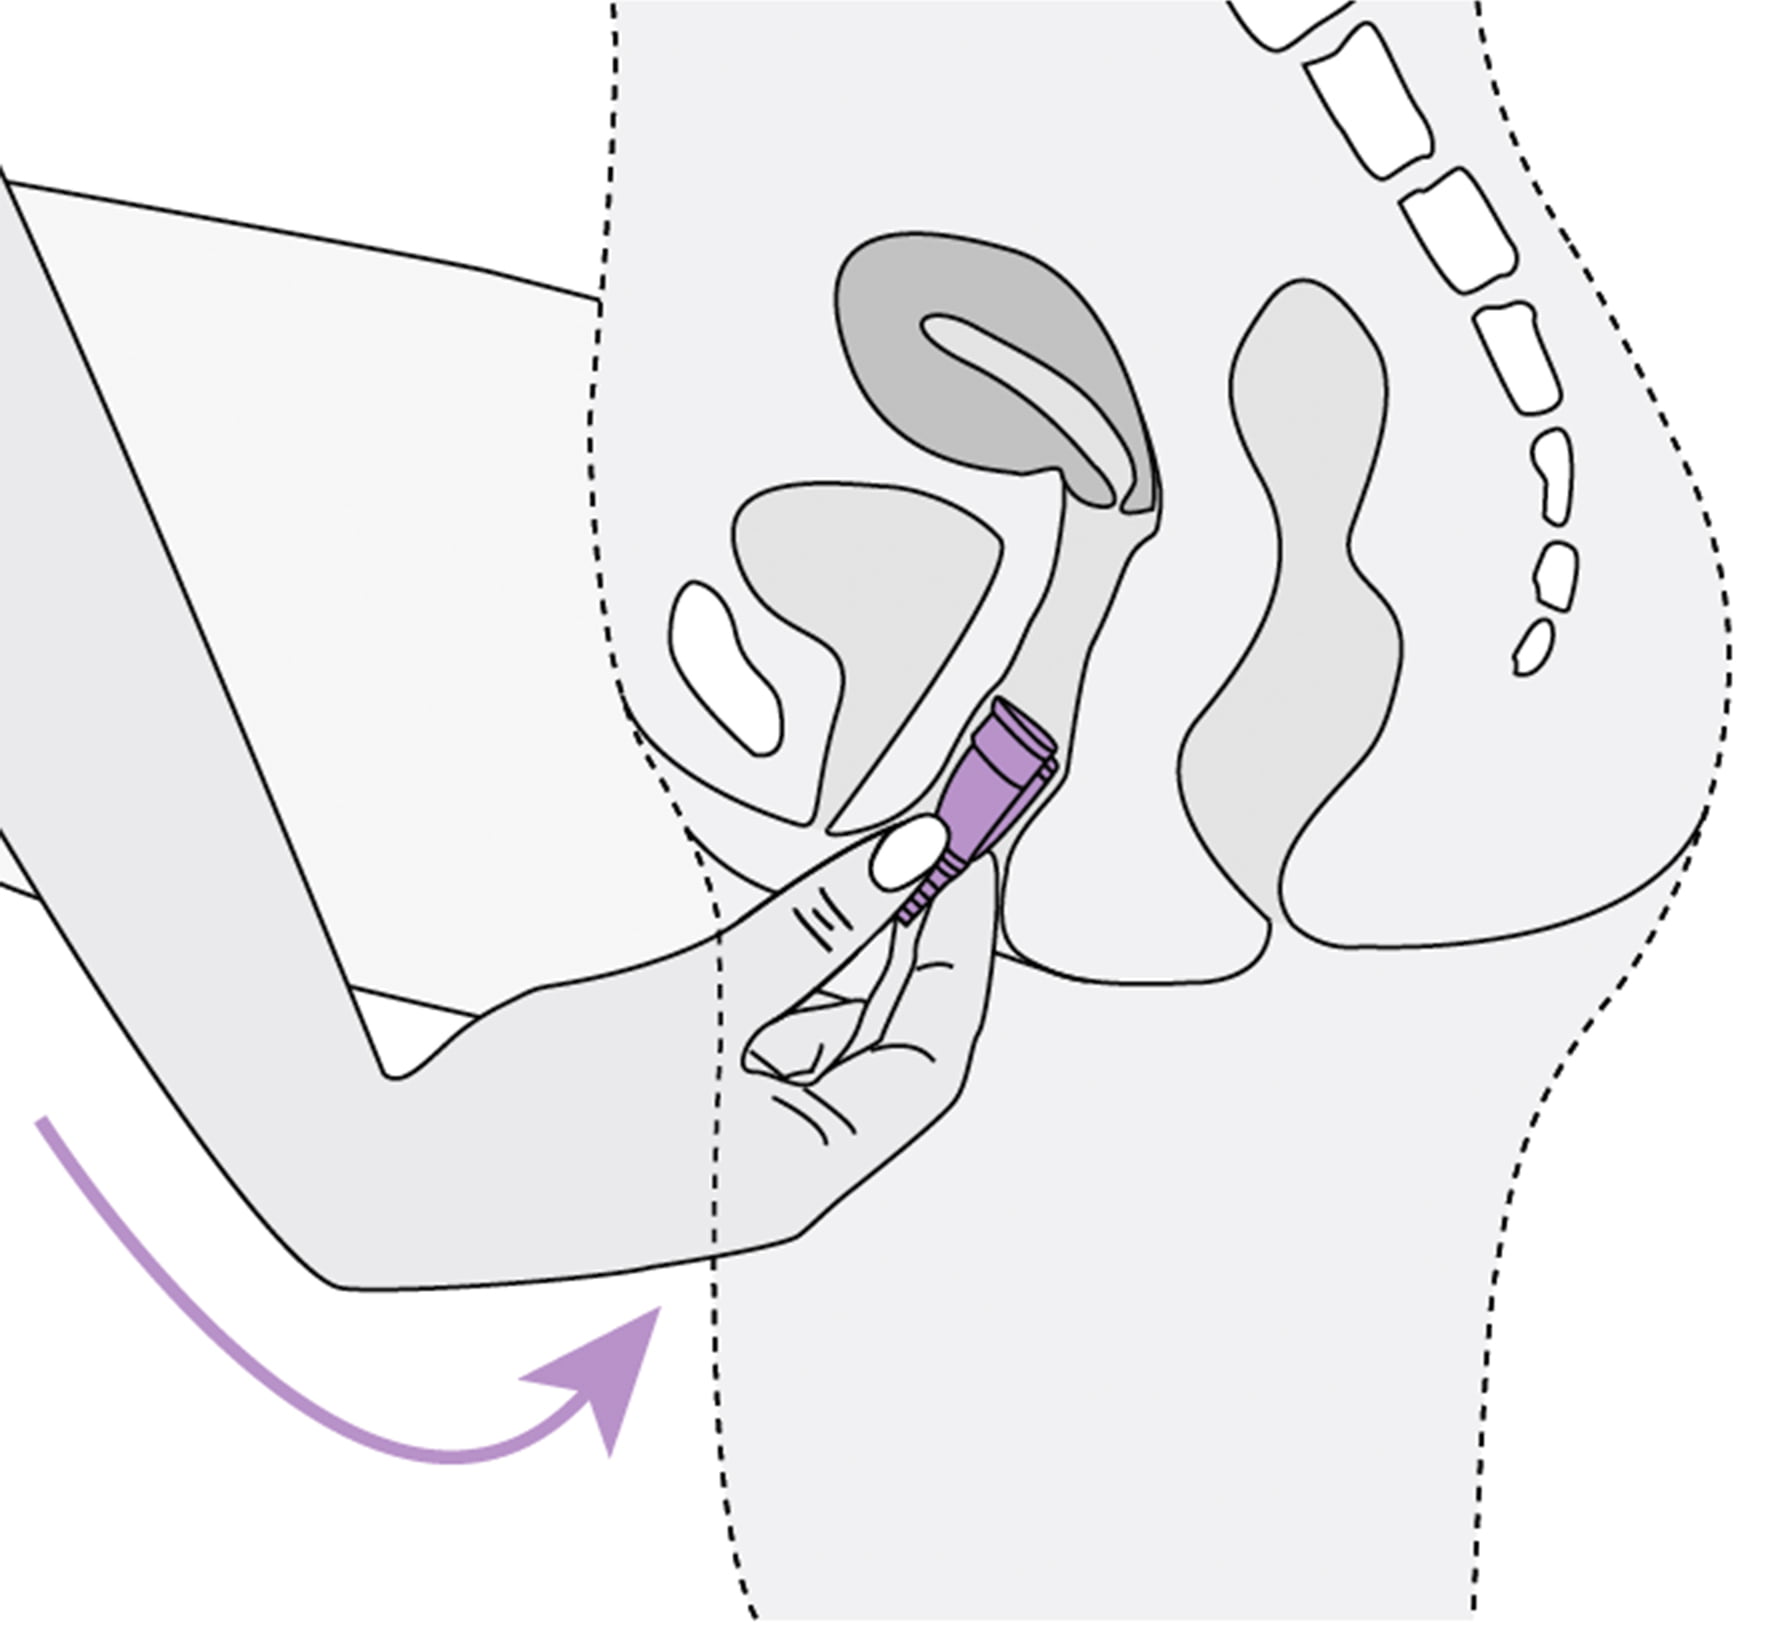 inserting-menstrual-cup